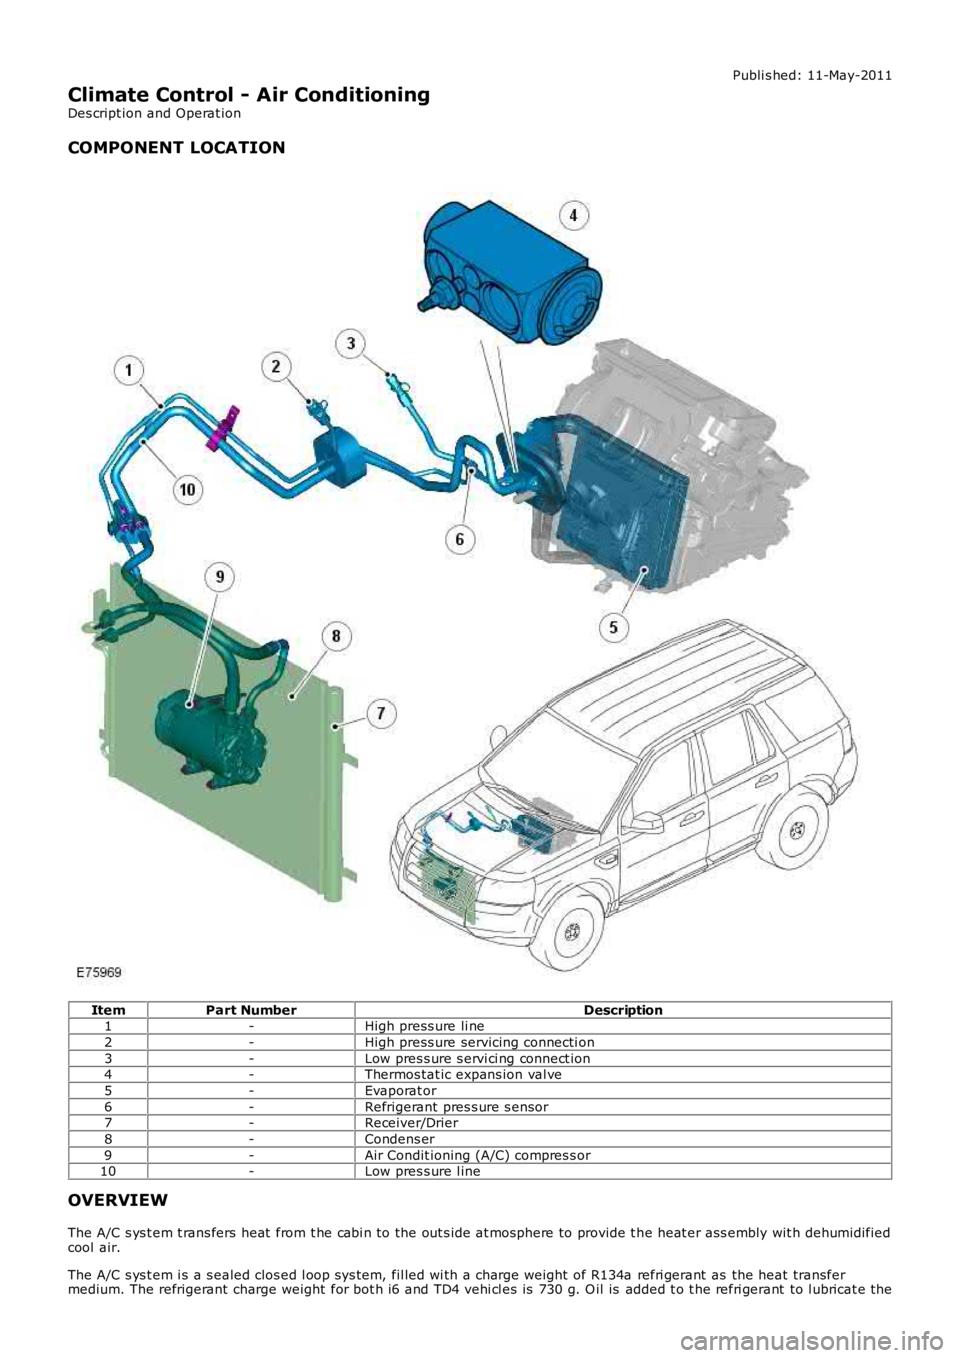 LAND ROVER FRELANDER 2 2006  Repair Manual Publi s hed: 11-May-2011
Climate Control - Air Conditioning
Des cript ion and Operat ion
COMPONENT LOCATION
ItemPart NumberDescription1-High press ure li ne
2-High press ure servicing connecti on
3-Lo